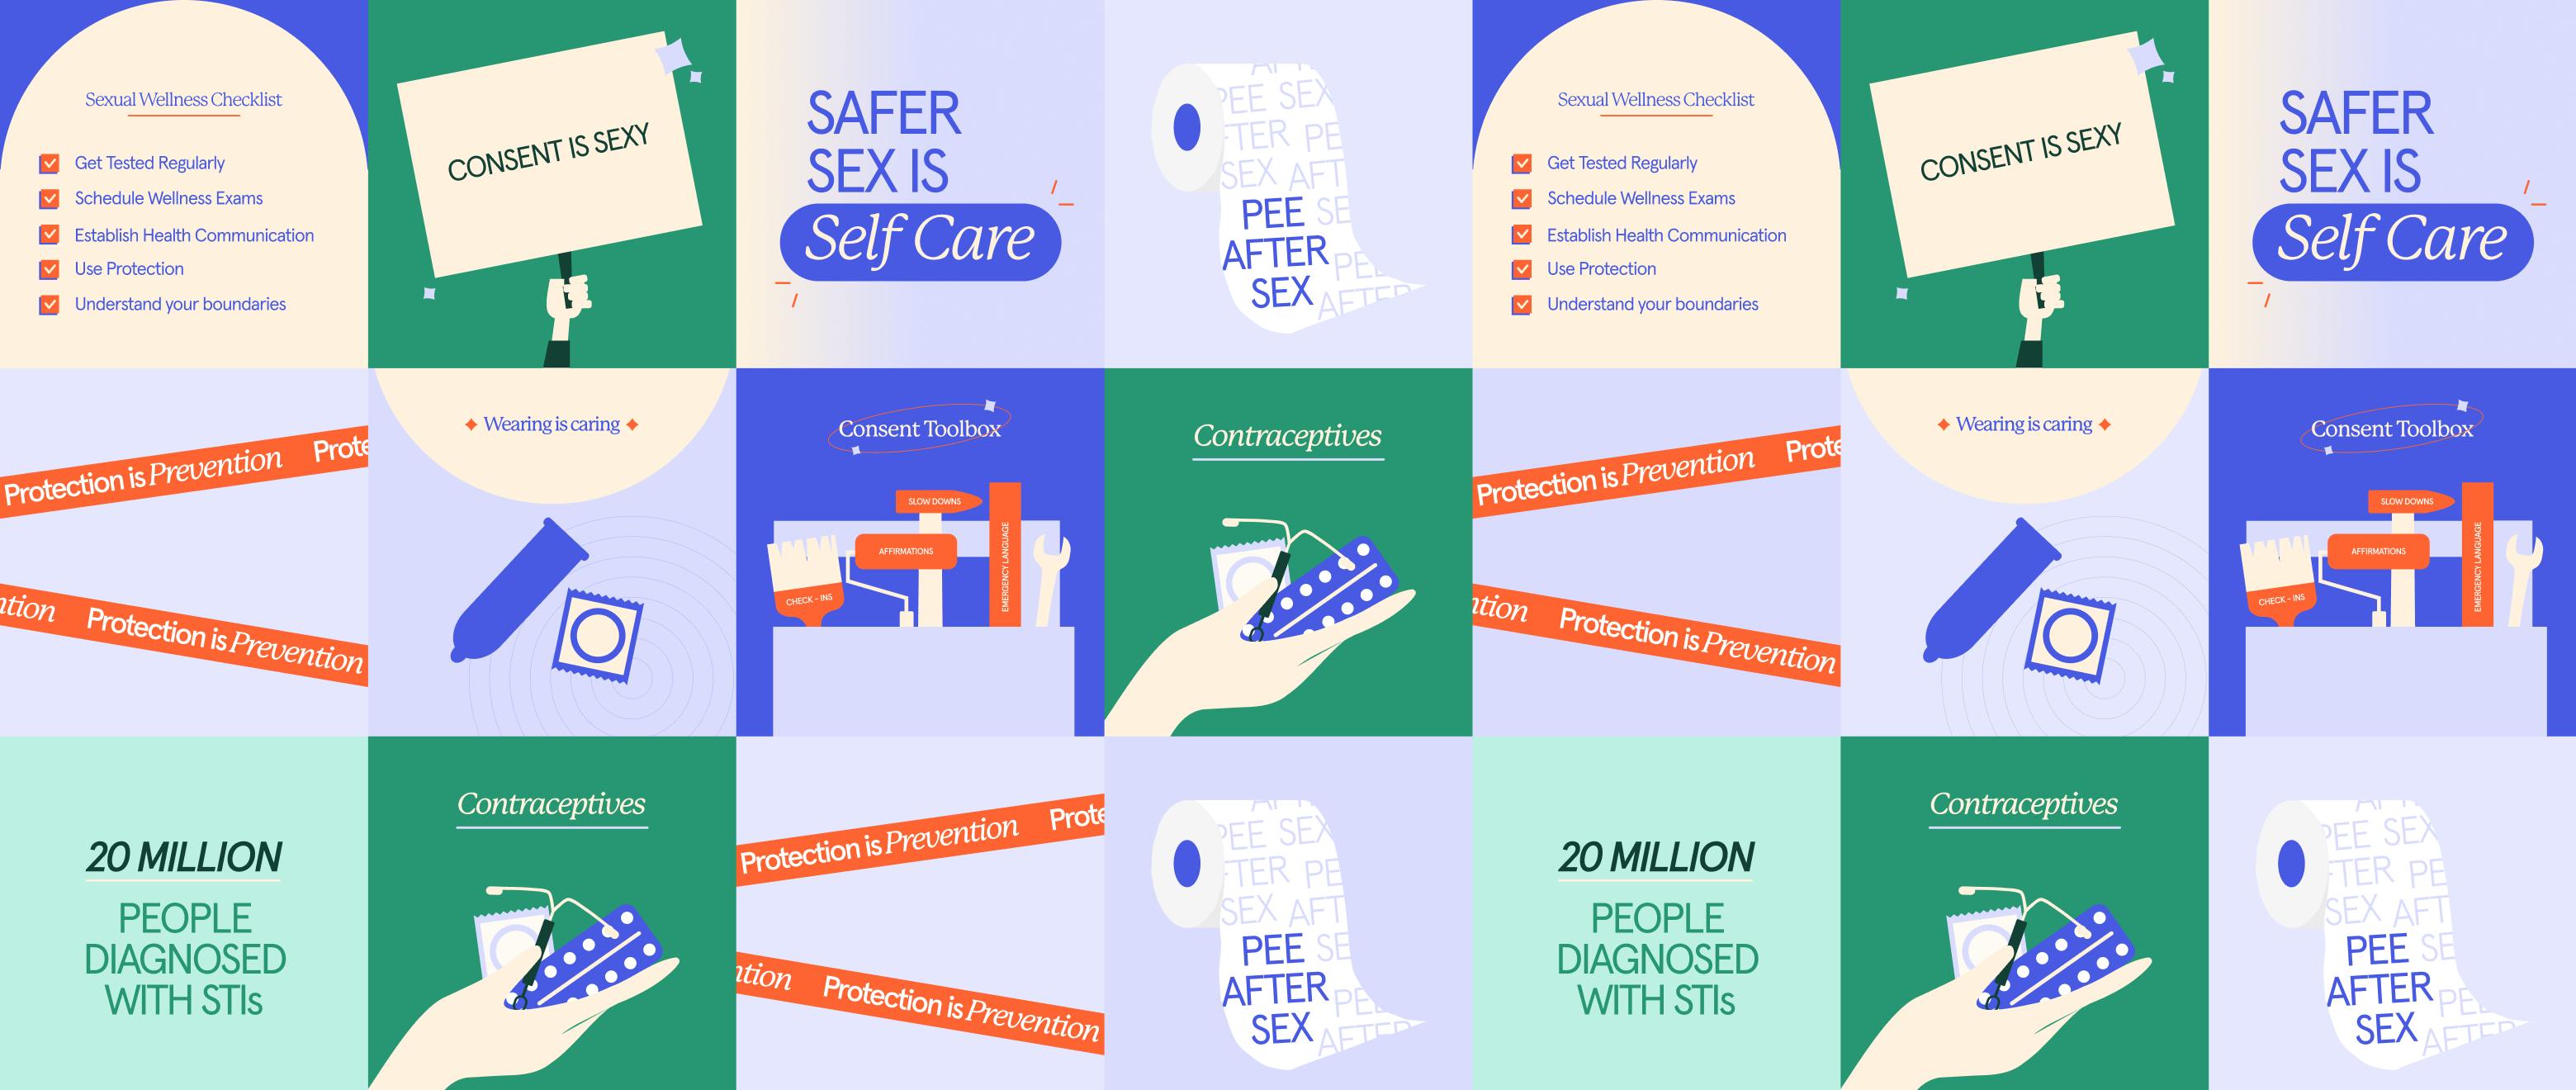 An informative collage about safe sex practices and STIs